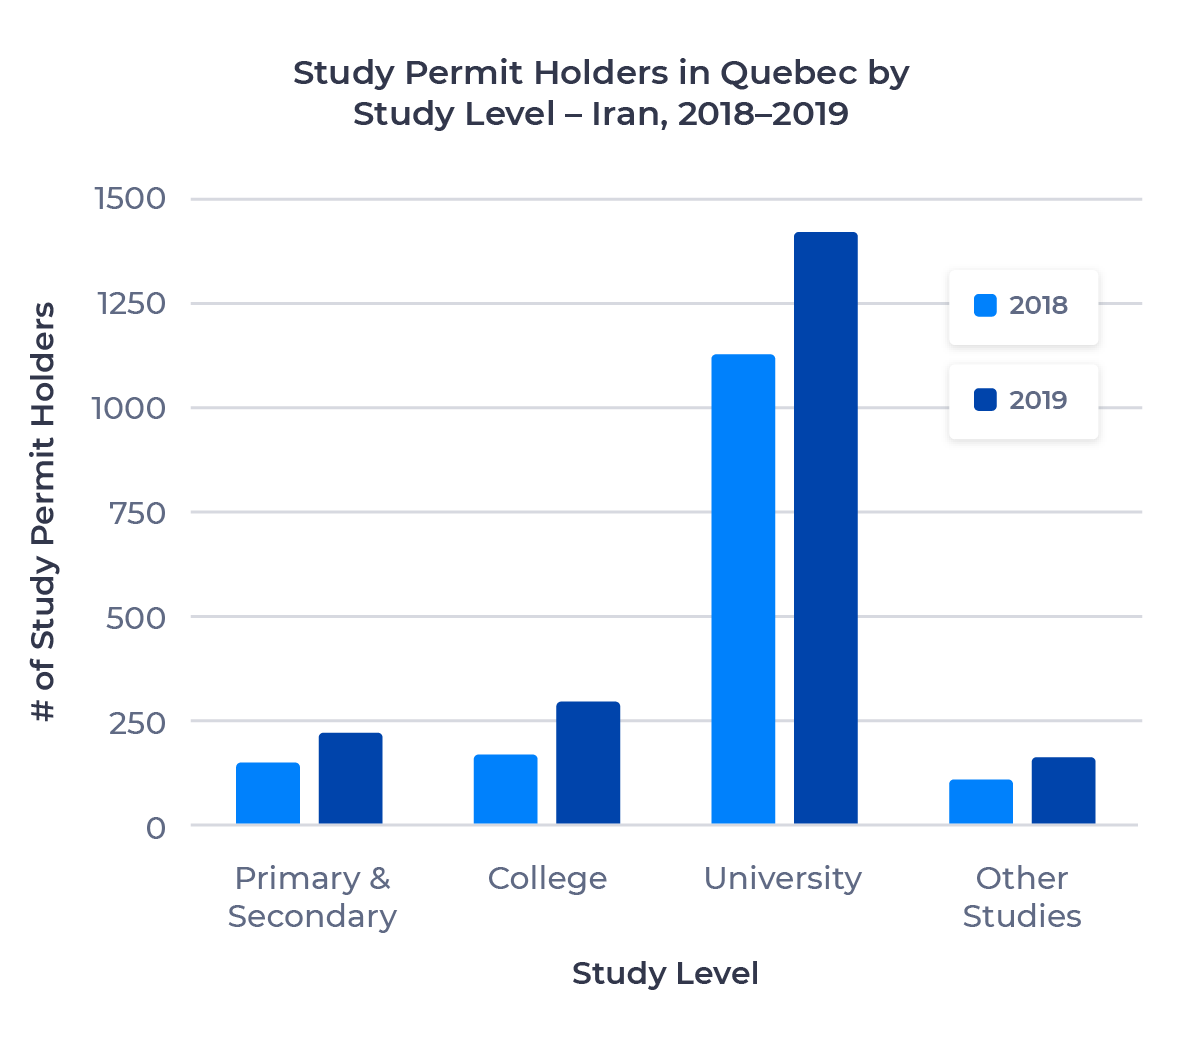 Bar chart showing the number of study permit holders in Quebec from Iran by study level. Described in detail below.